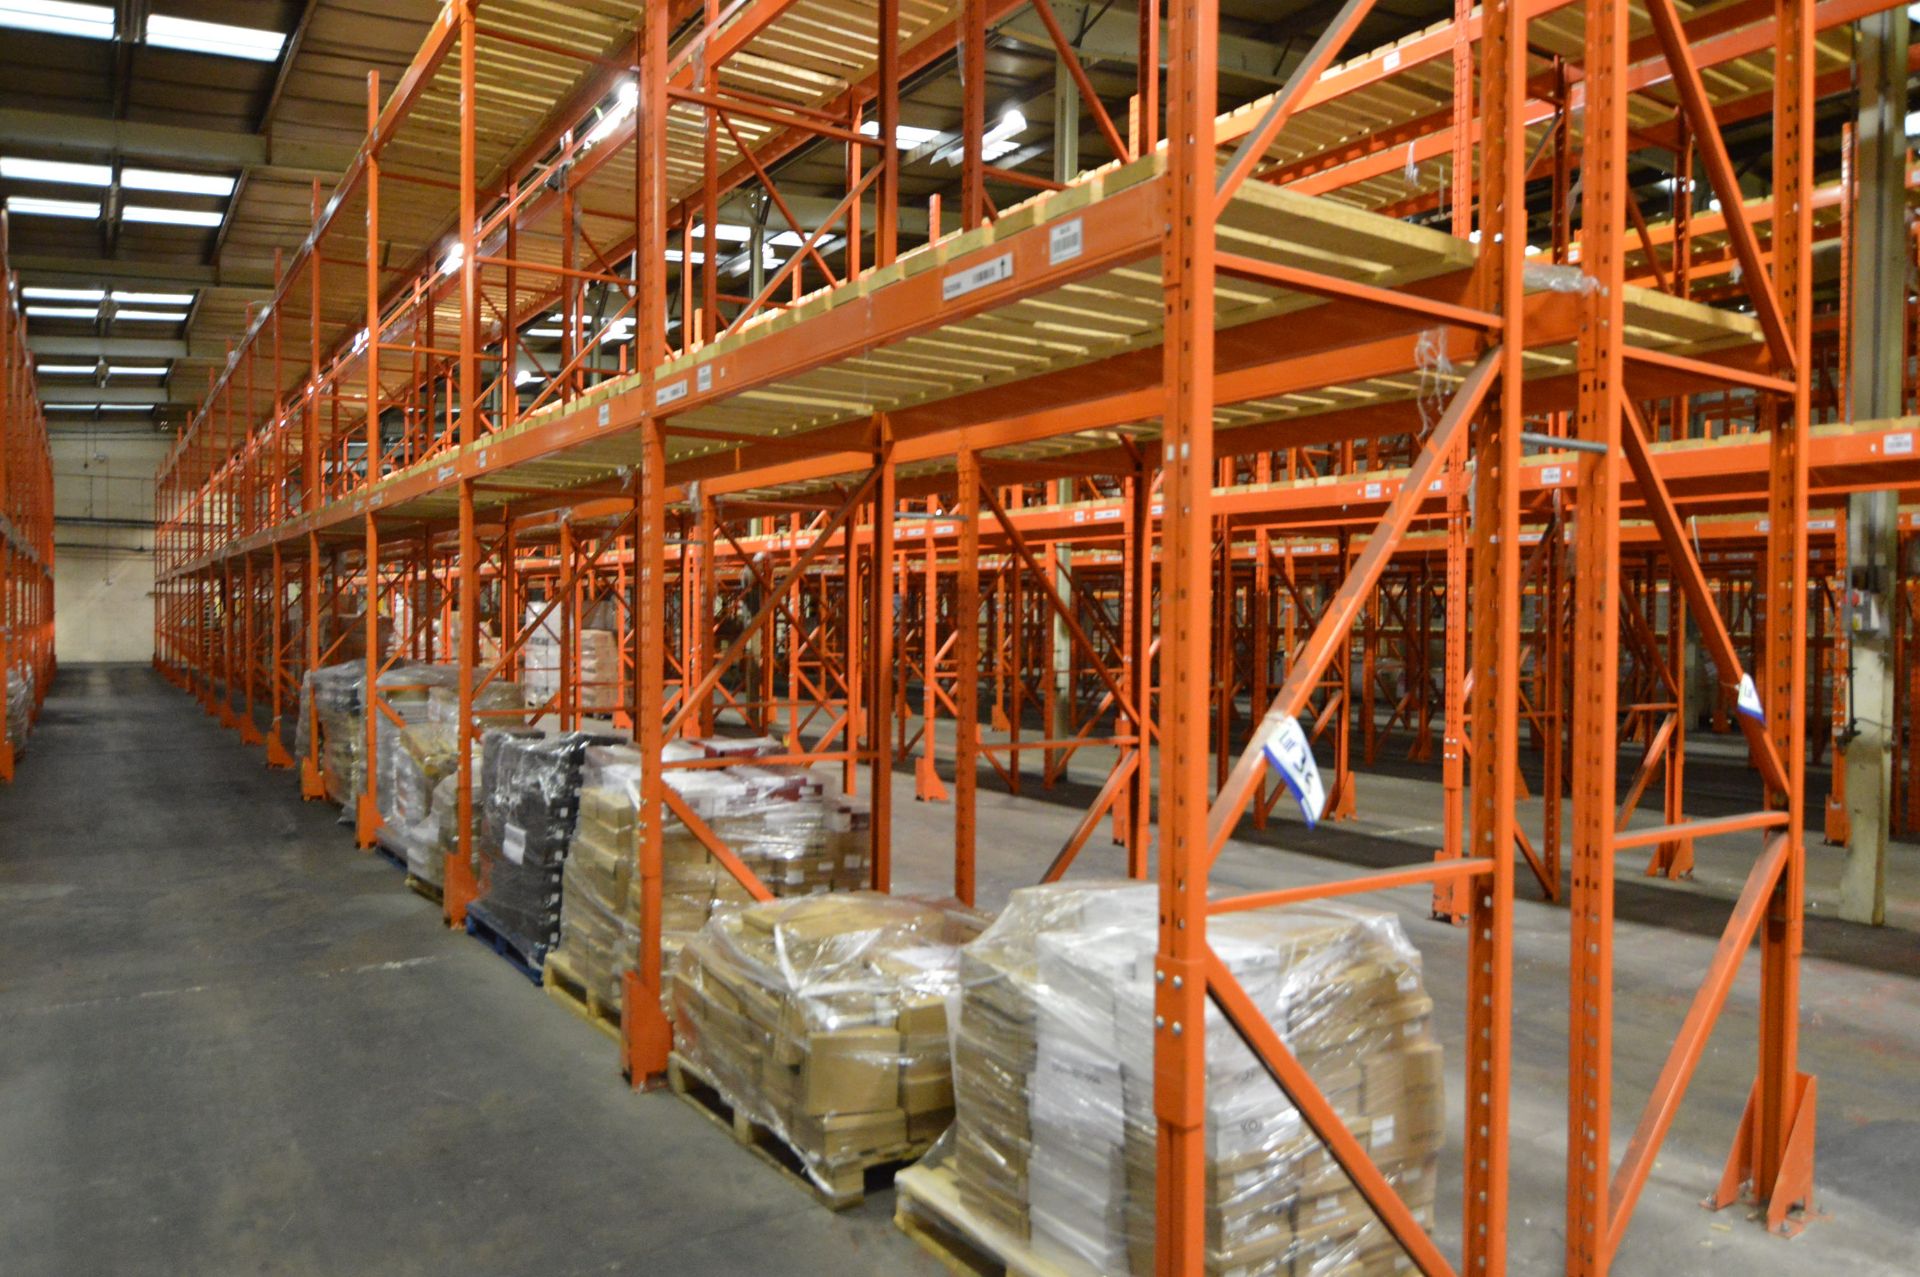 Redirack SD 2.50 DOUBLE SIDED 30 BAY MAINLY TWO TIER PALLET RACK, each run approx. 41m x 1m x 5.4m - Image 2 of 4